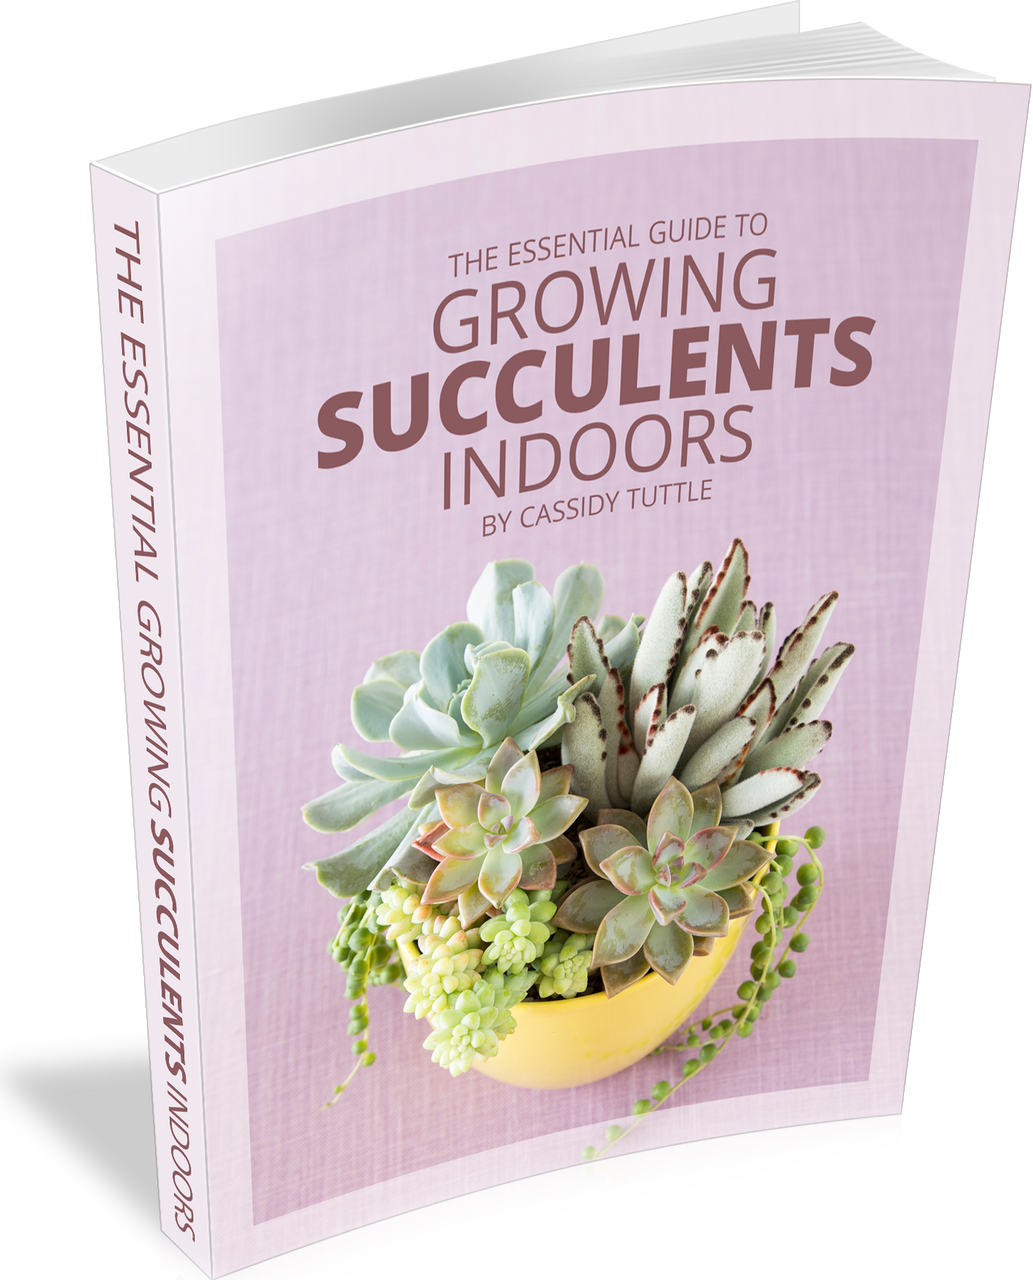 The Essential Guide to Growing Succulents Indoors (E-Book) Questions & Answers